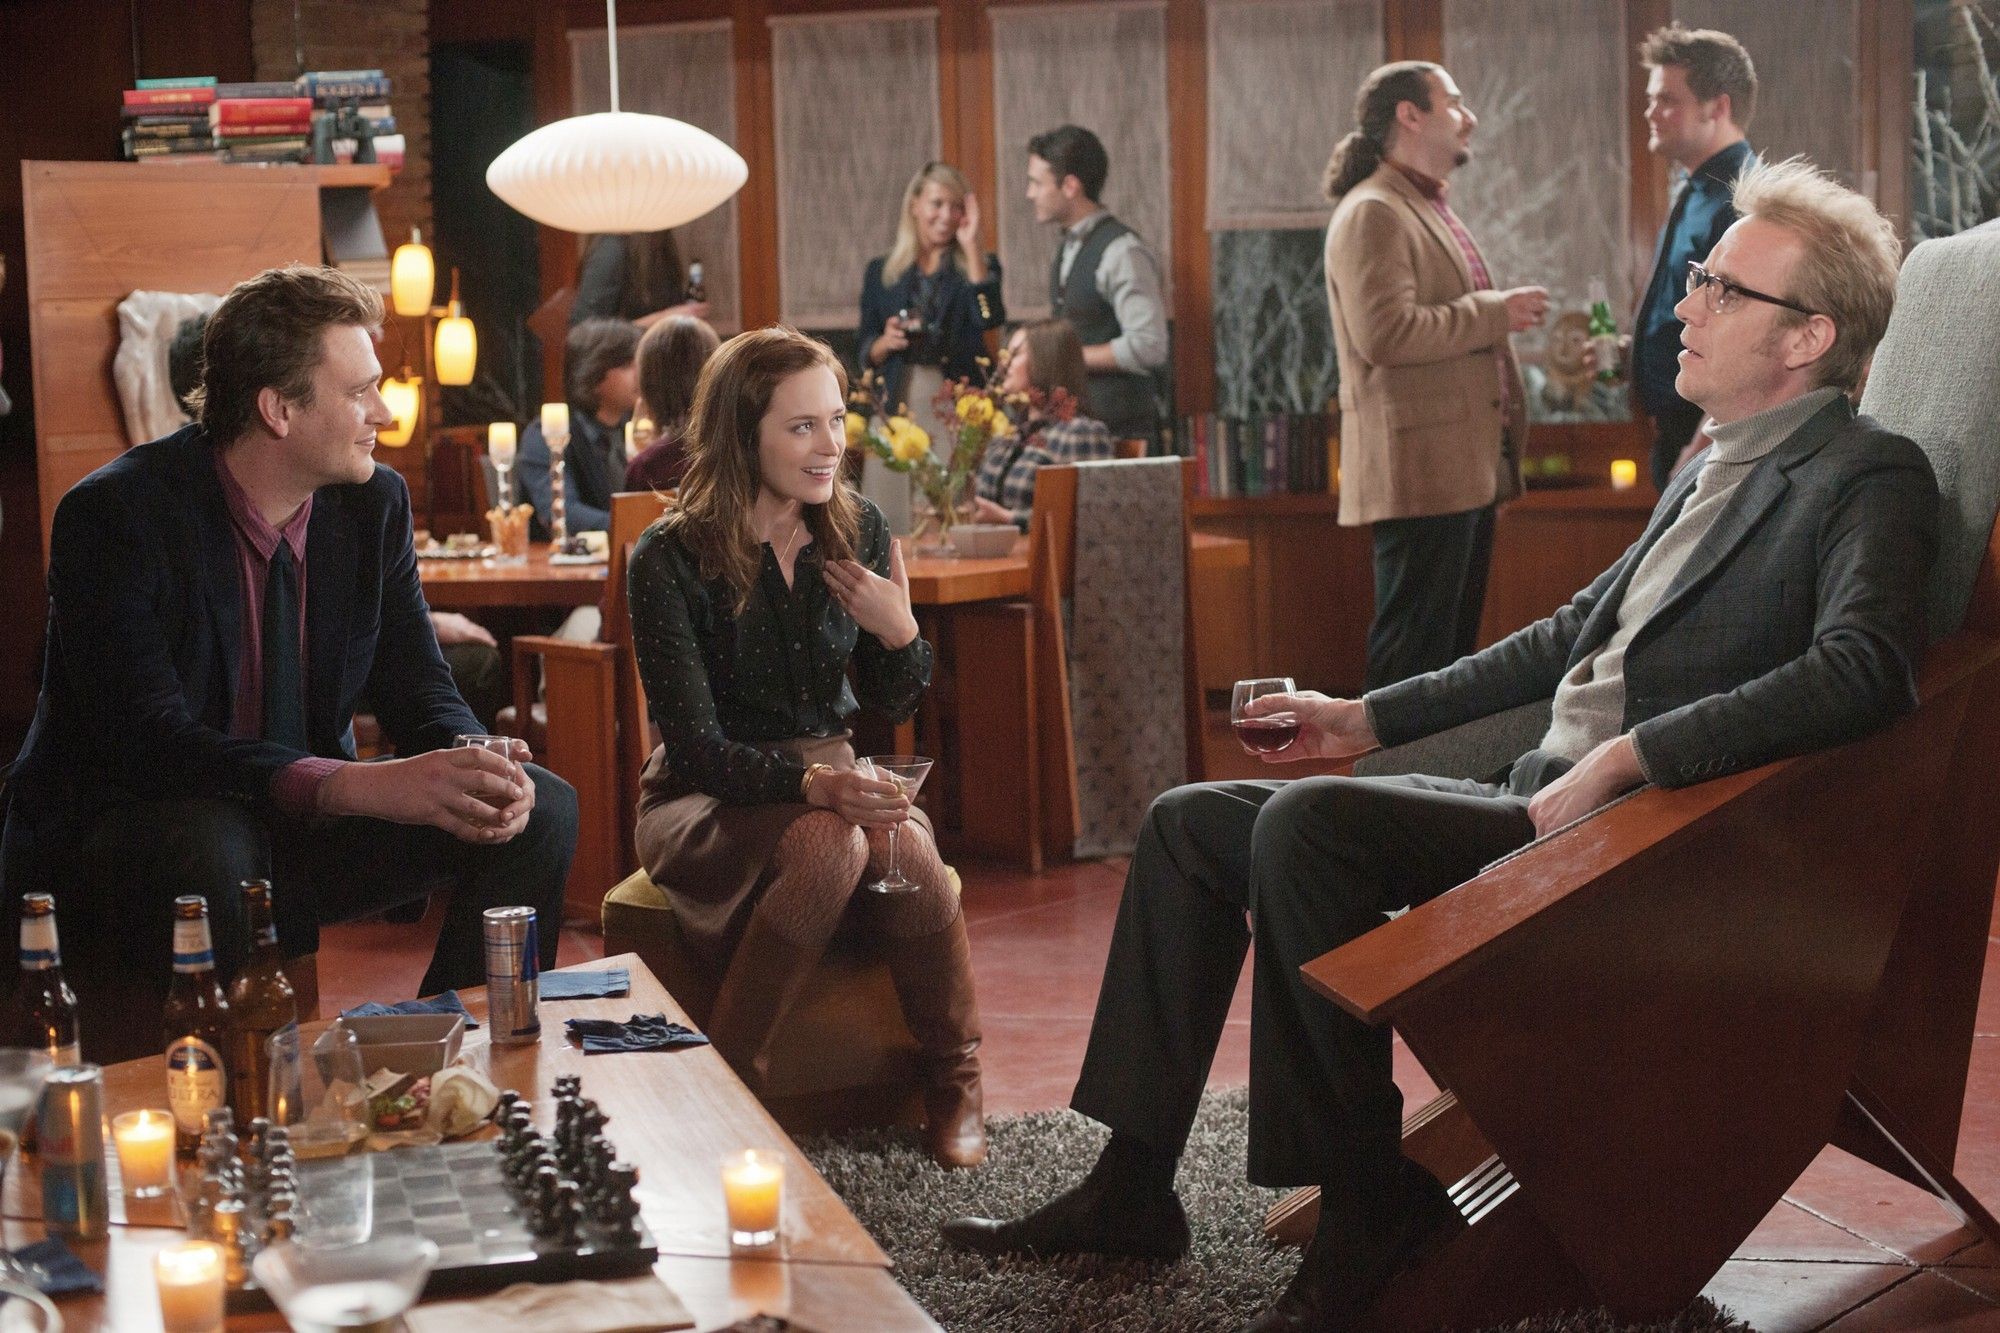 Jason Segel, Emily Blunt and Rhys Ifans in Universal Pictures' The Five-Year Engagement (2012)